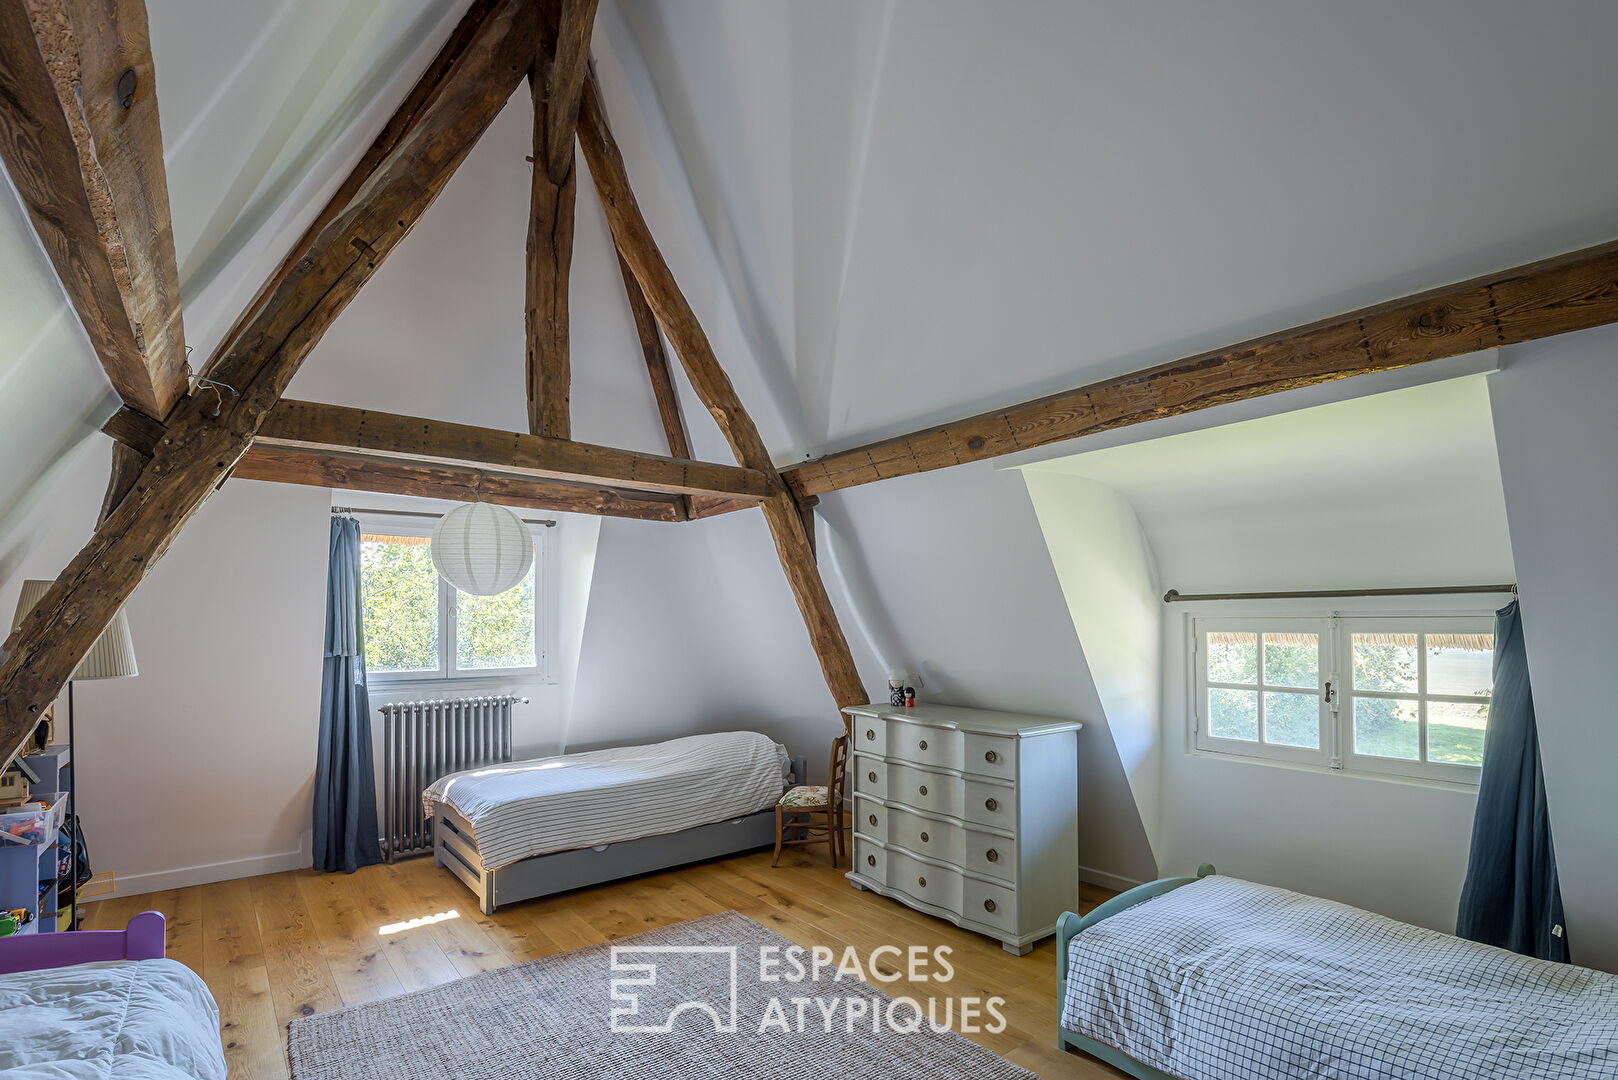 Renovated cottage on the banks of the Seine and its 3 outbuildings on its wooded park